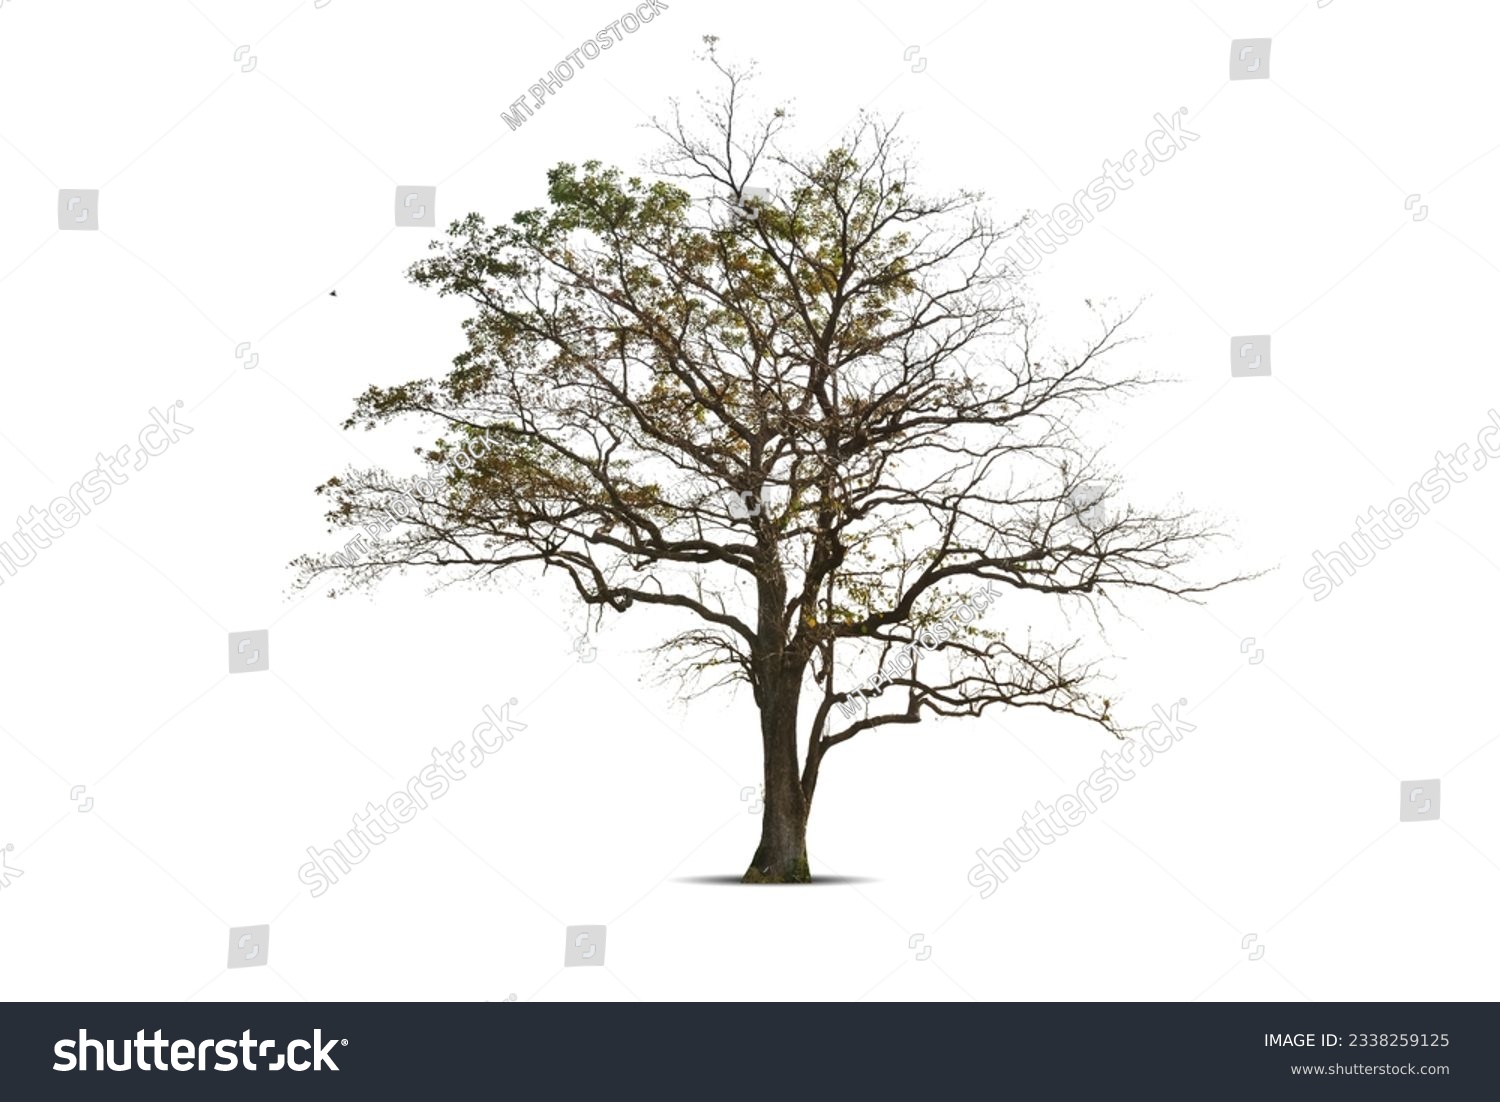 Dry branch of big dead tree with cracked dark bark stem. Beautiful old tree isolated on white background. Single old and dead tree on nature. Alone wooden trunk forest in fall season change #2338259125